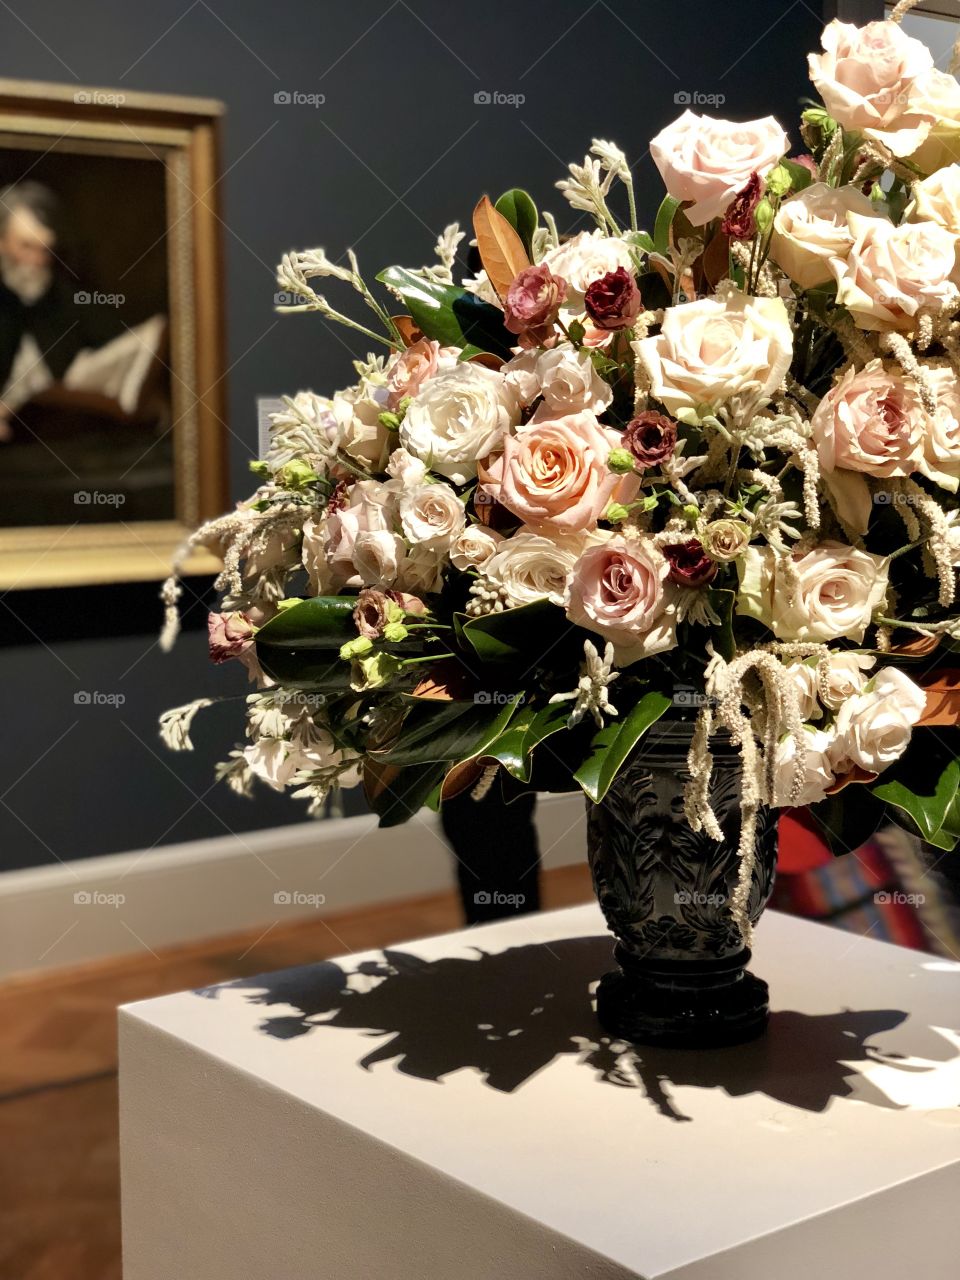 A floral arrangement designed to compliment the painting behind it. 